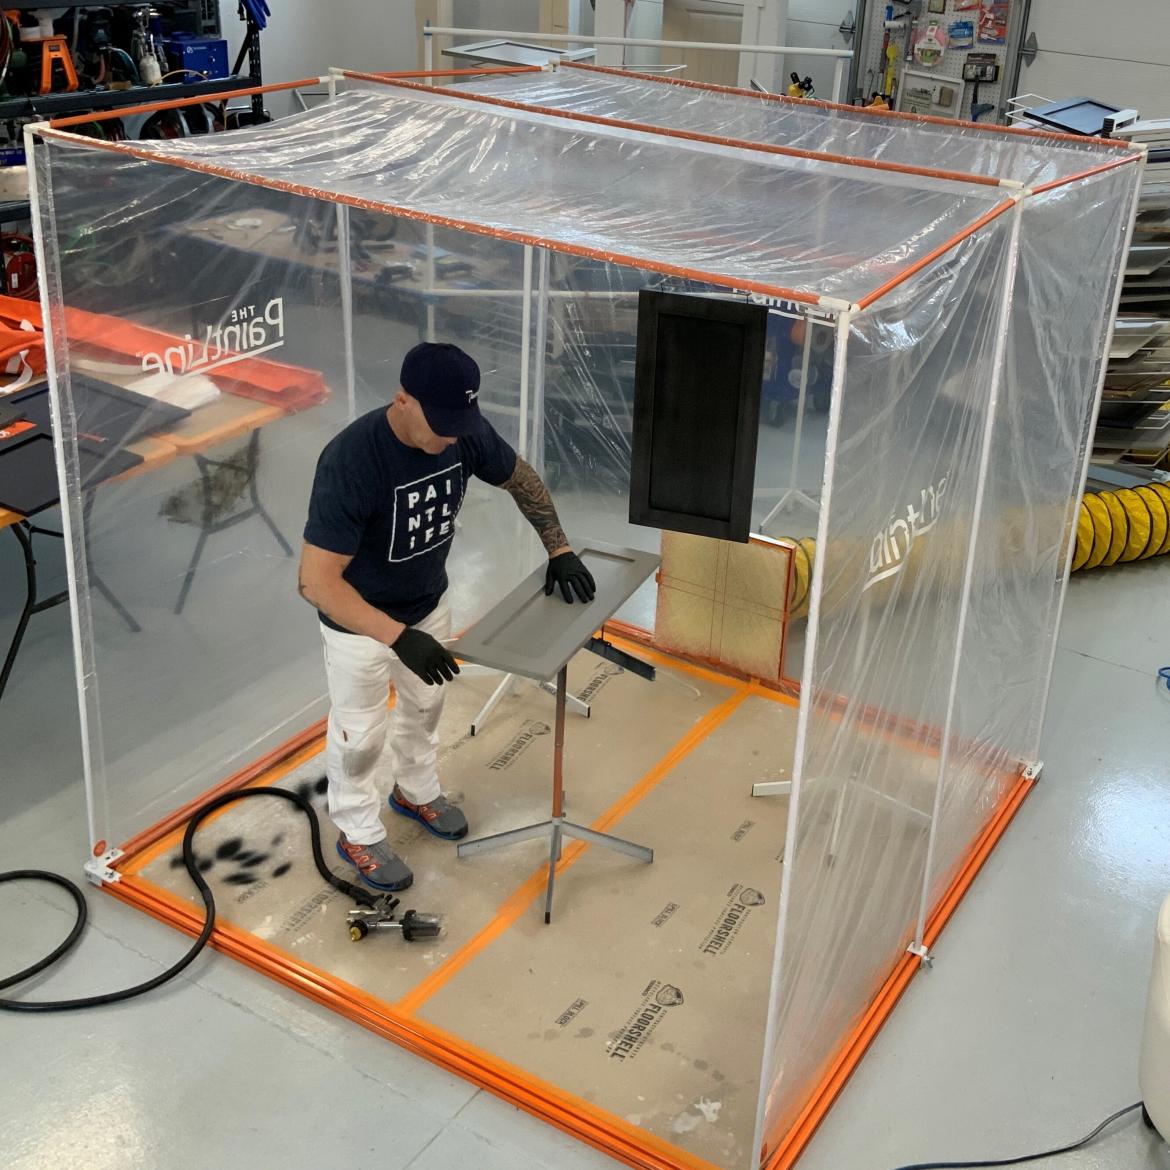 PaintLine Releases Portable Jobsite Spray Booth Aimed at Reducing